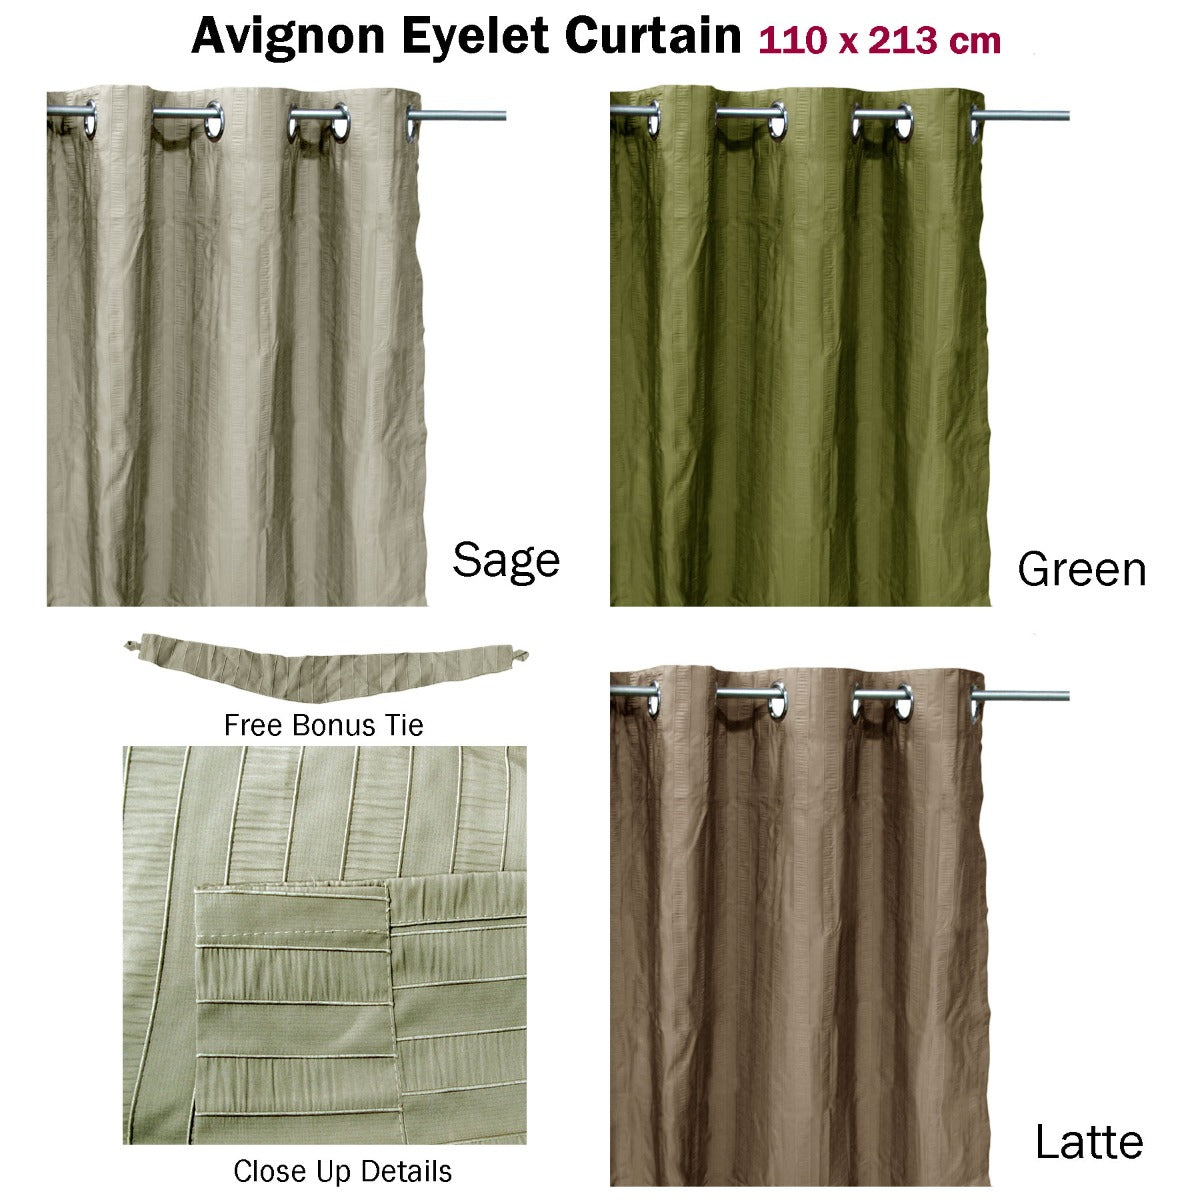 One Piece of Avignon Unlined Eyelet Curtain 110 x 213cm Sage